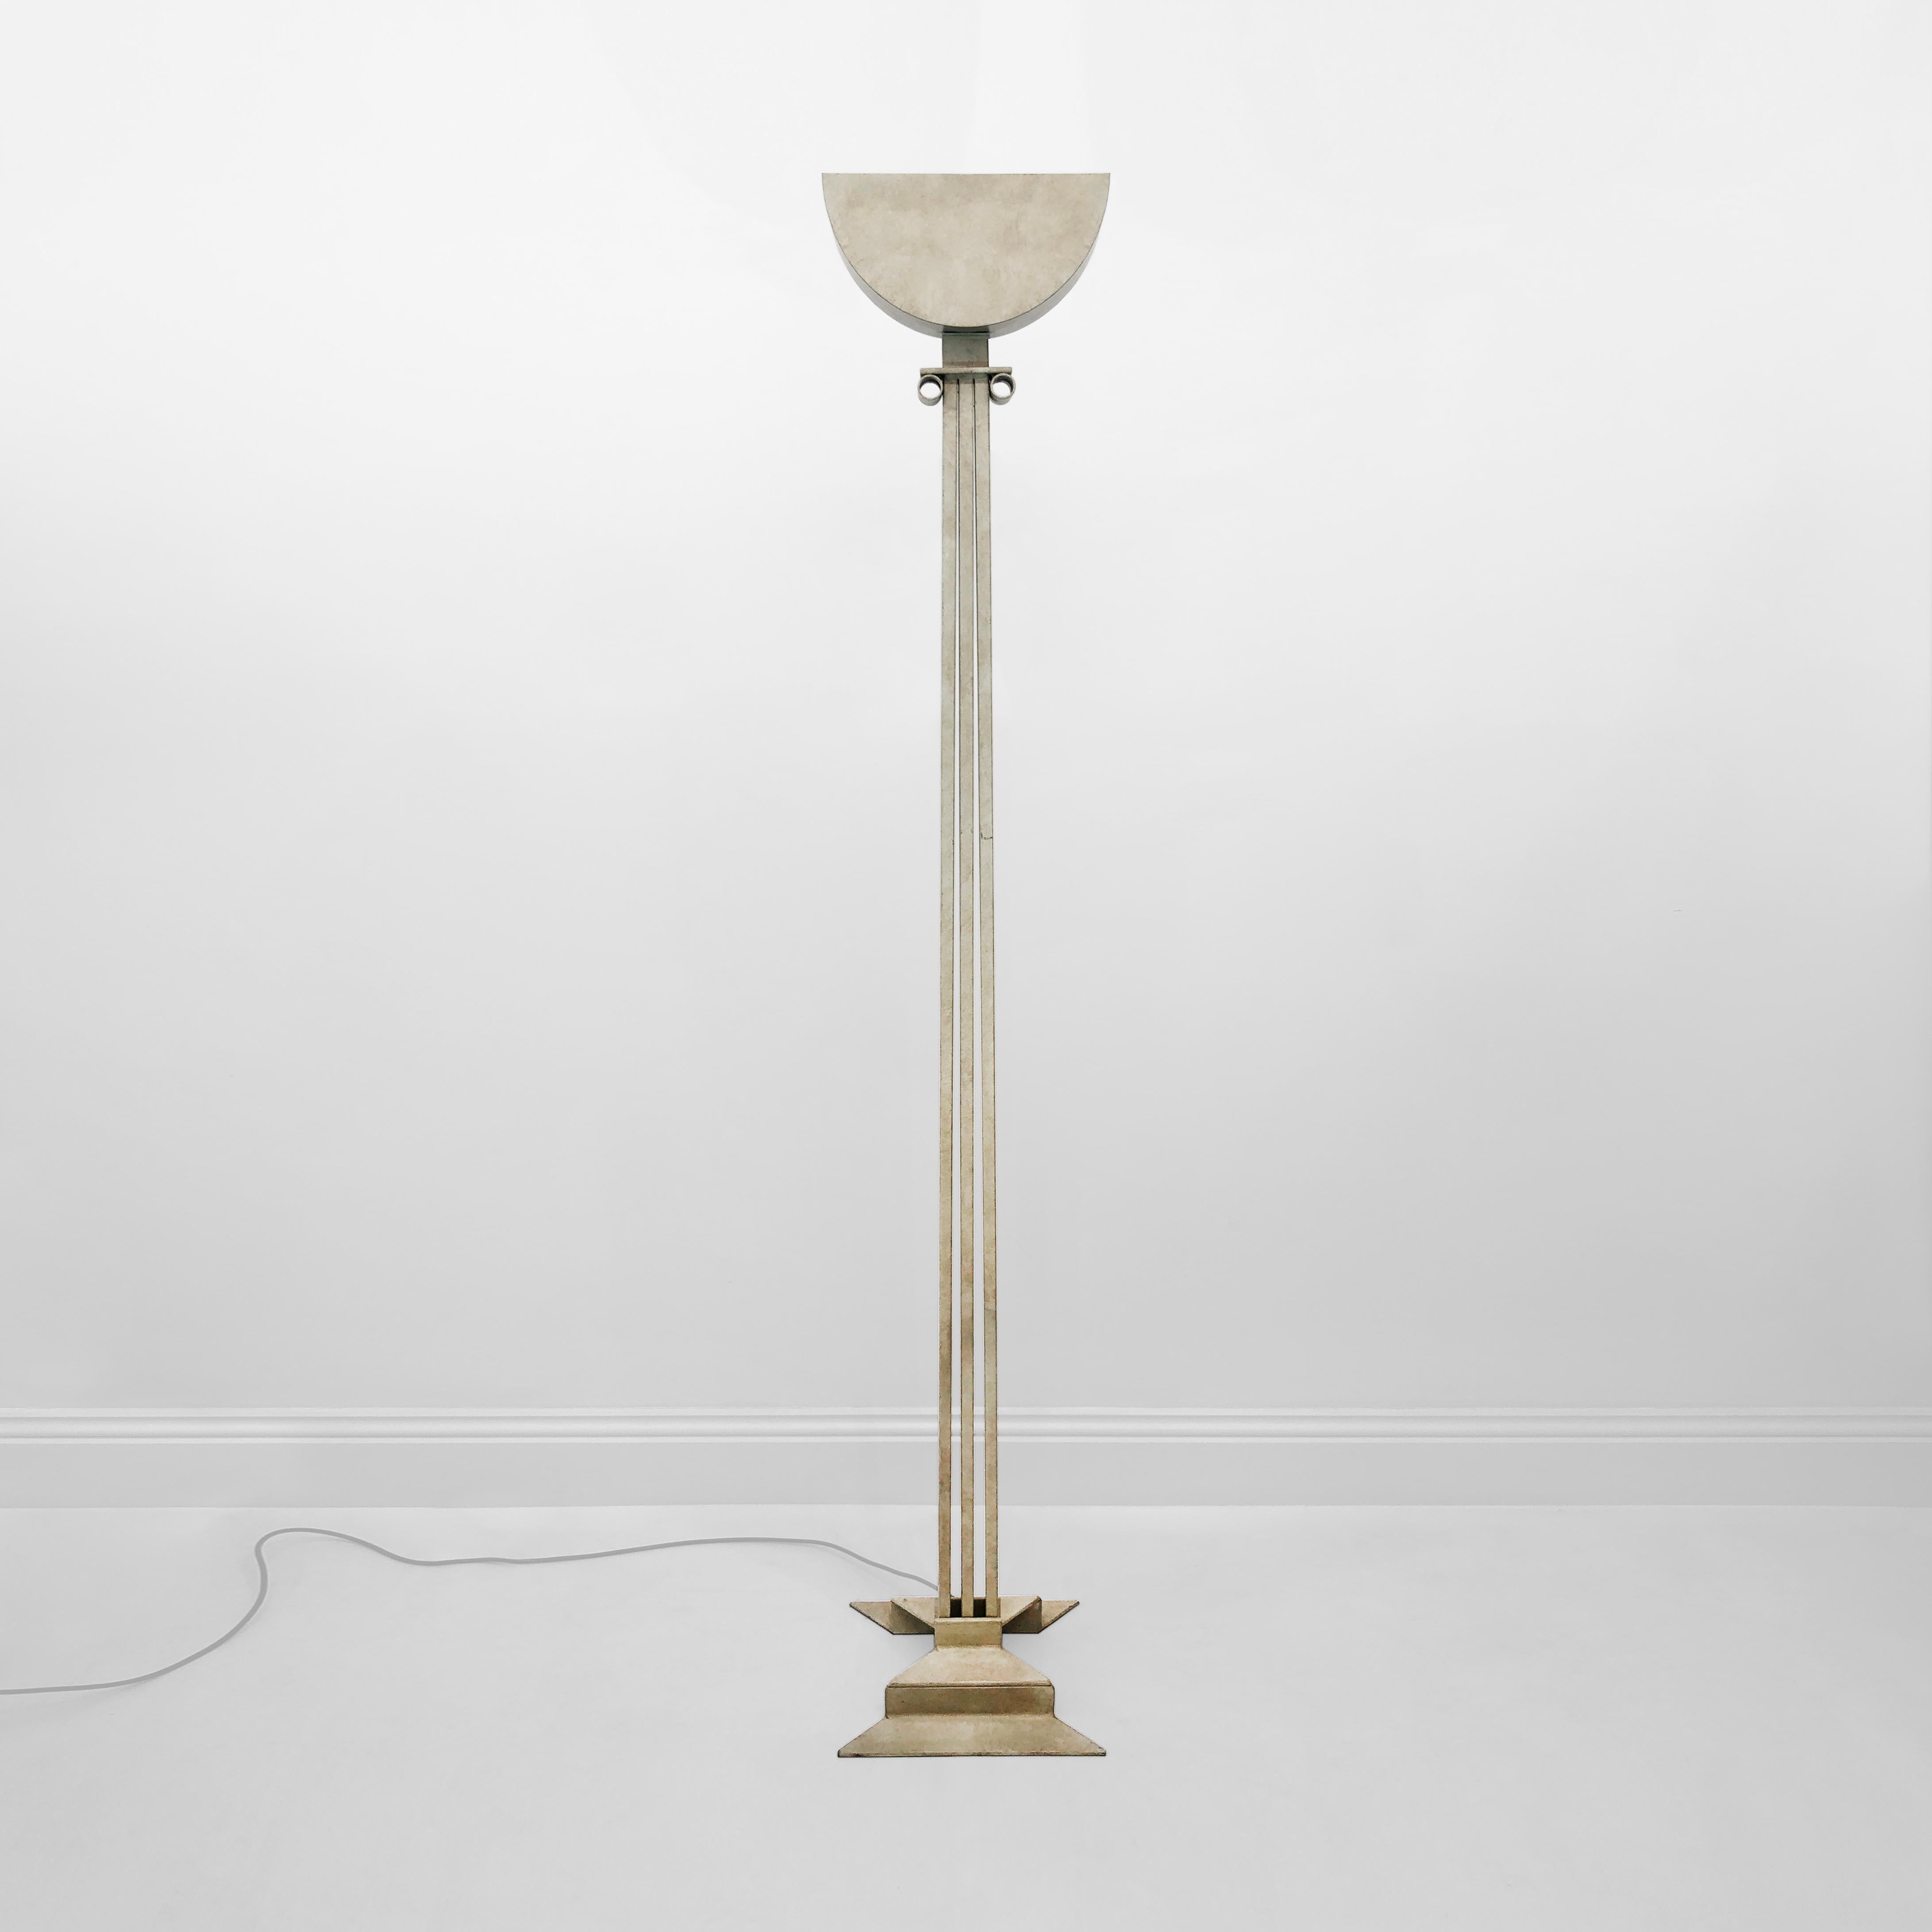 This impressive floor lamp is a playful, post-modern look at neoclassicism. The base is shaped like a bow, and from that protrudes three straight columns, meeting at an ionic head. A half-moon uplighter completes the piece, which is made entirely of